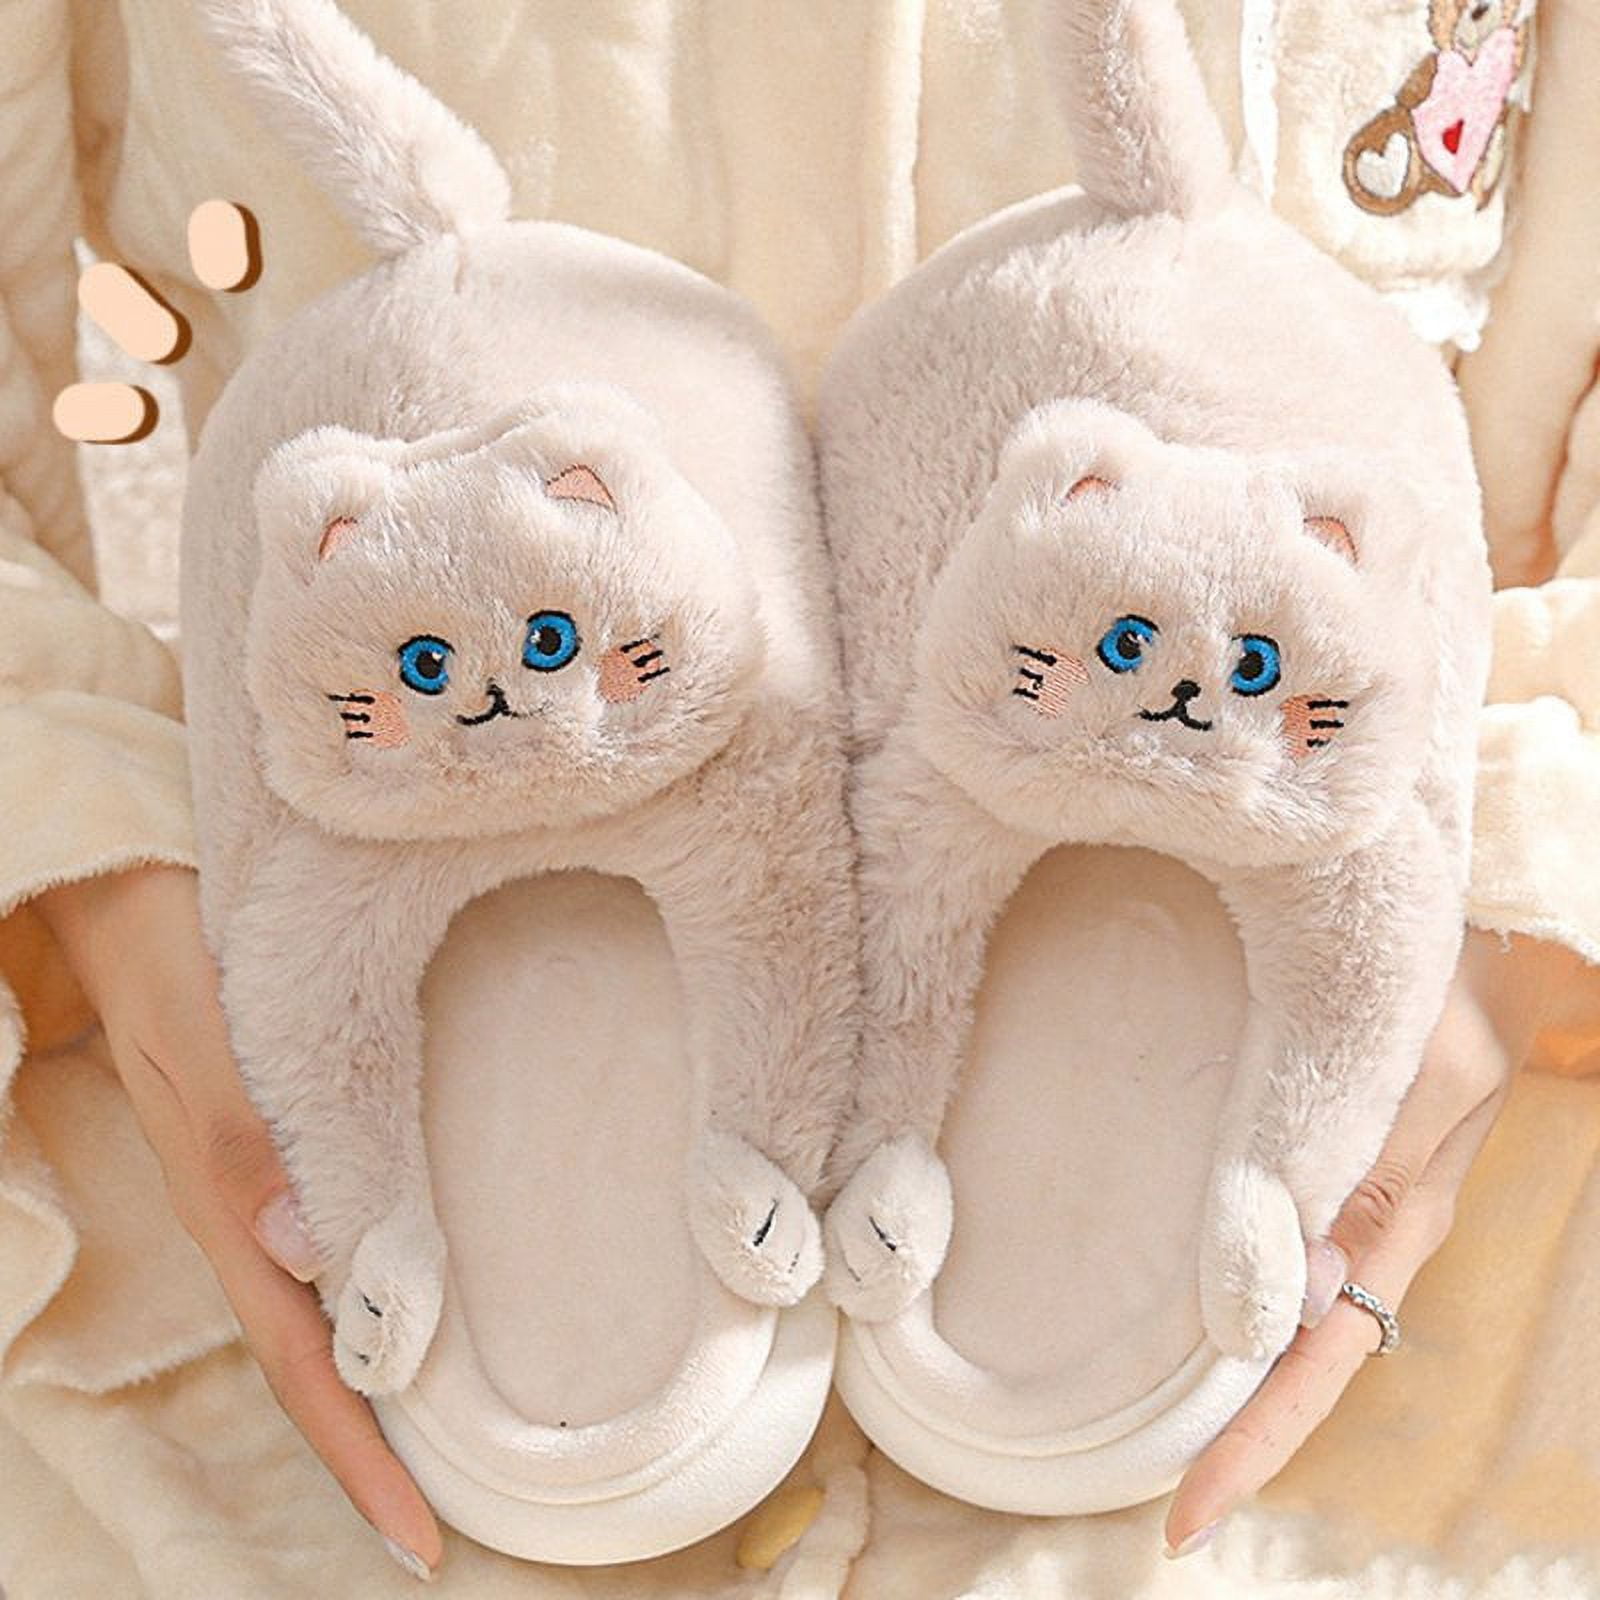 Pin by A.kash on Cute slippers  Cute slippers, Slippers, Slide slipper